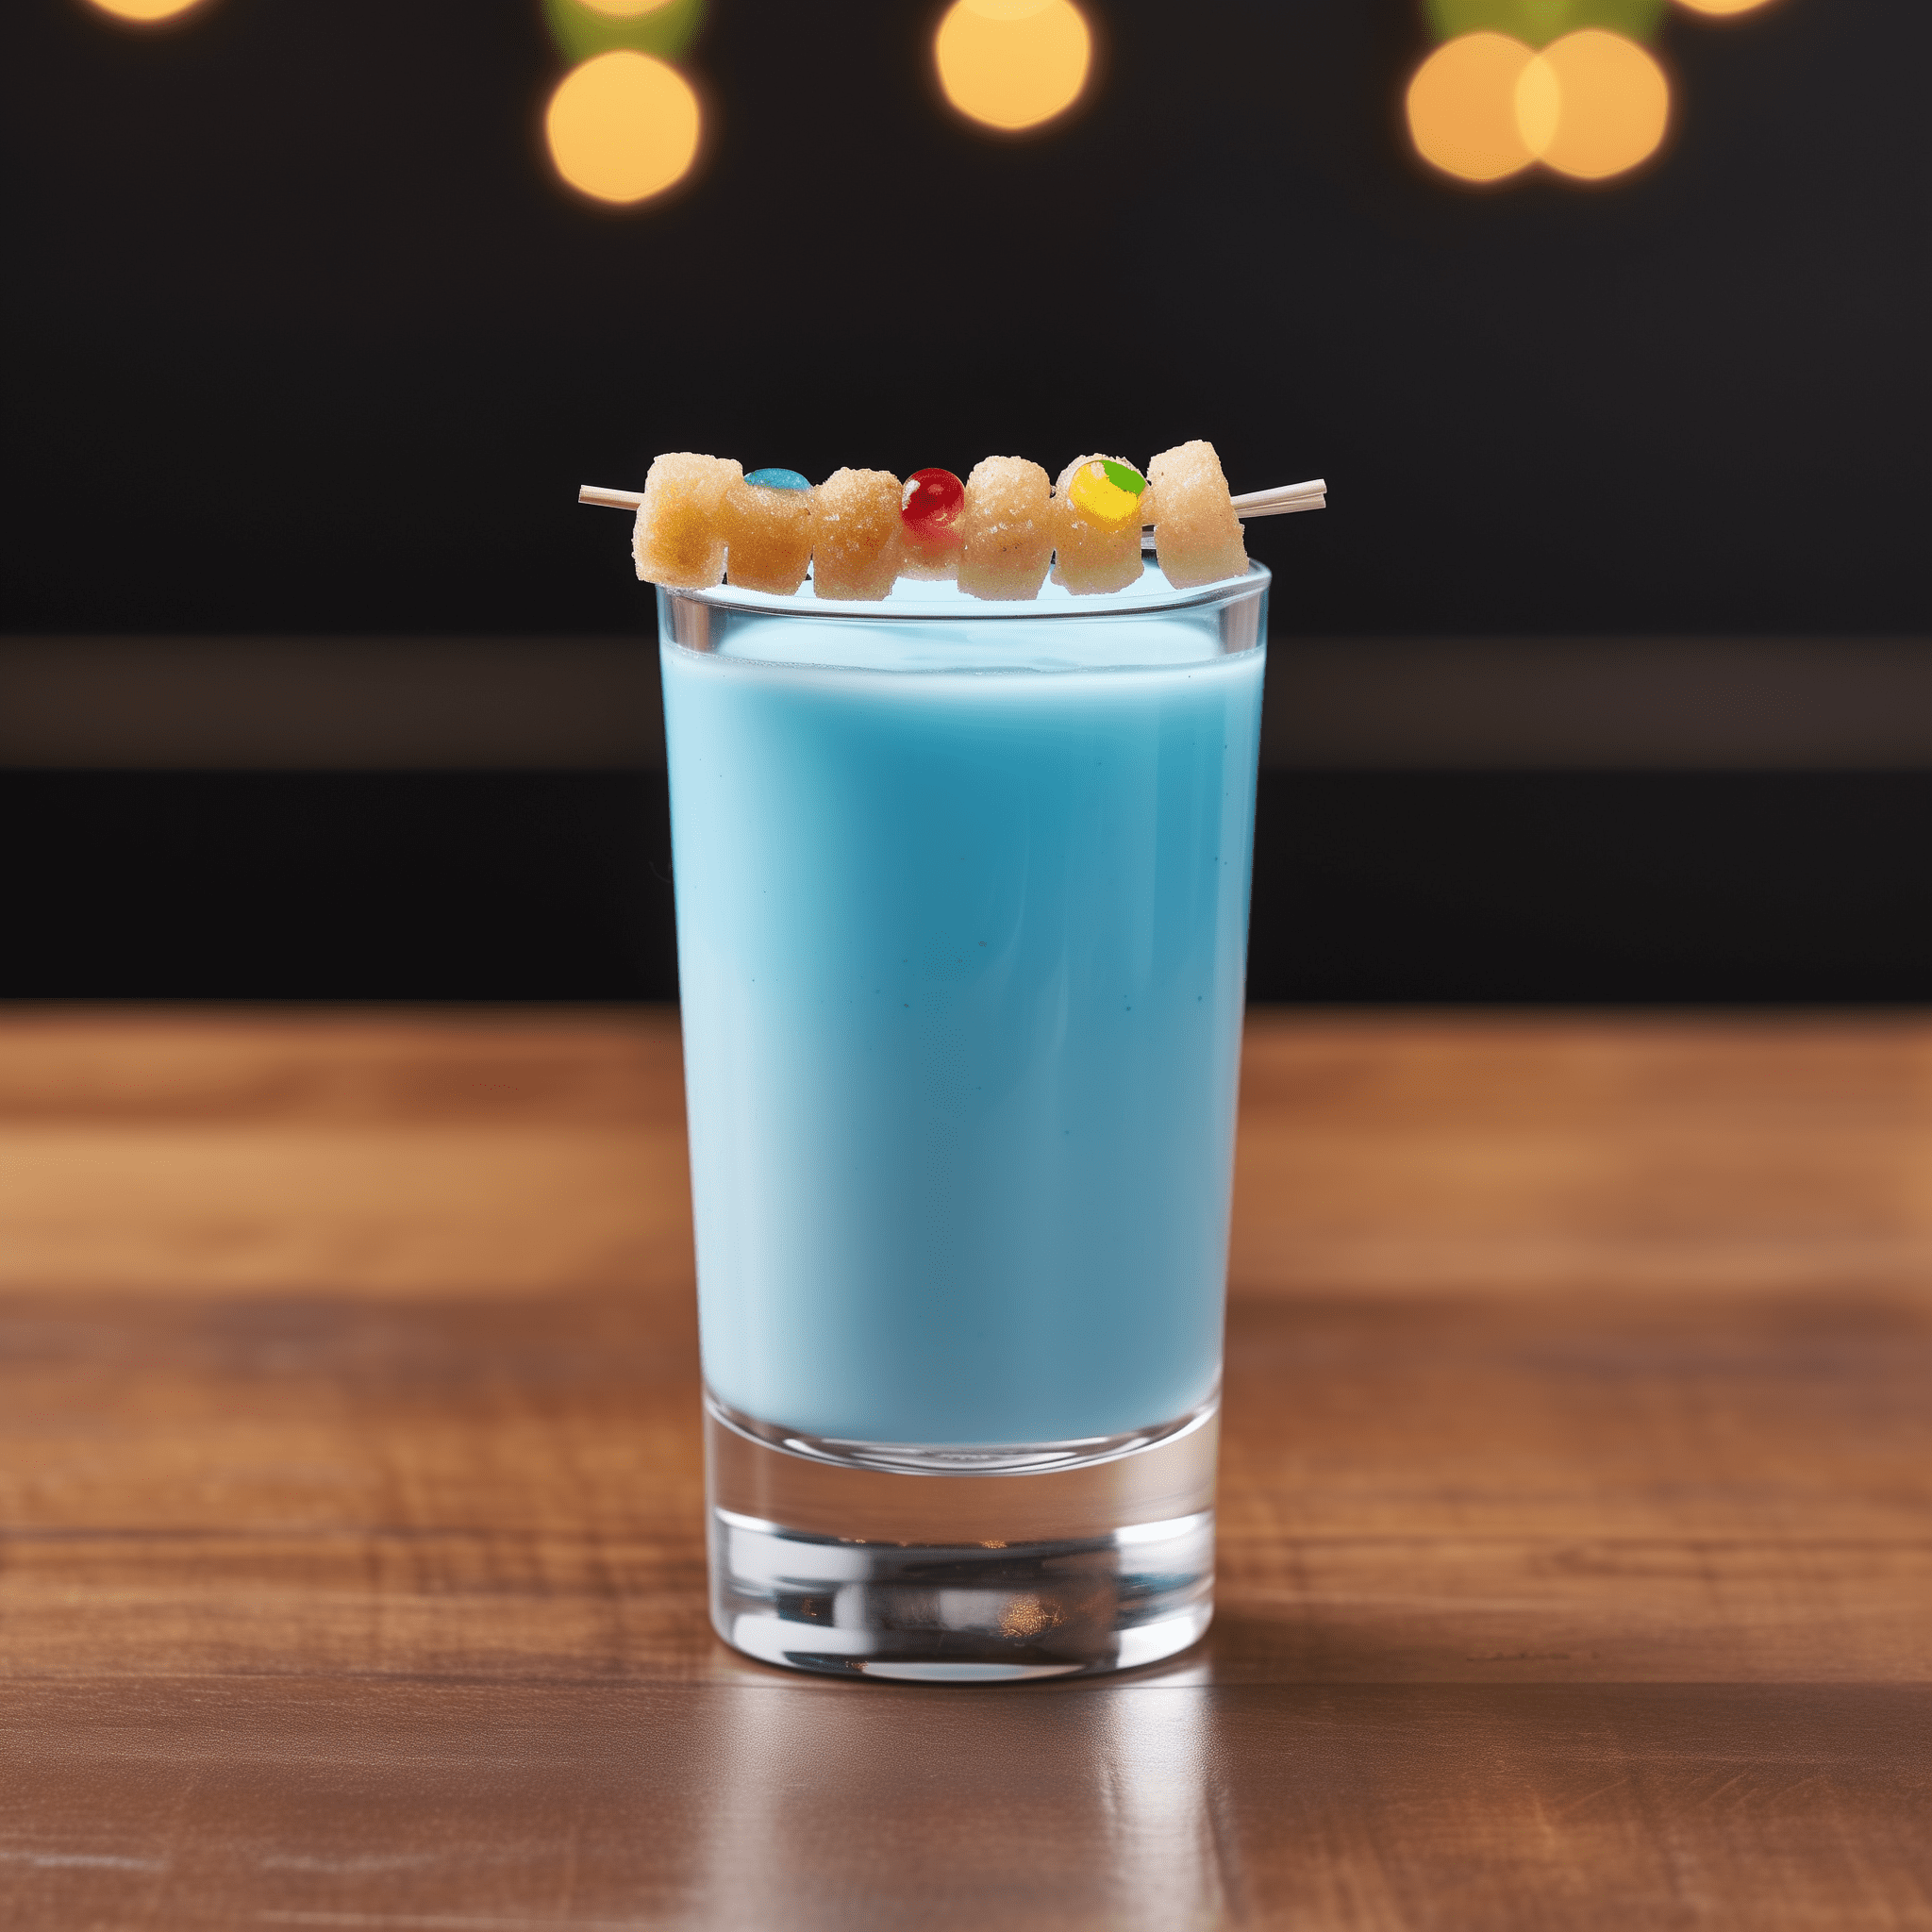 Froot Loop Shot Recipe - The Froot Loop Shot is sweet and creamy, with a fruity undertone that's surprisingly reminiscent of the cereal. The amaretto adds a nutty depth, while the blue curacao gives it a citrus kick.